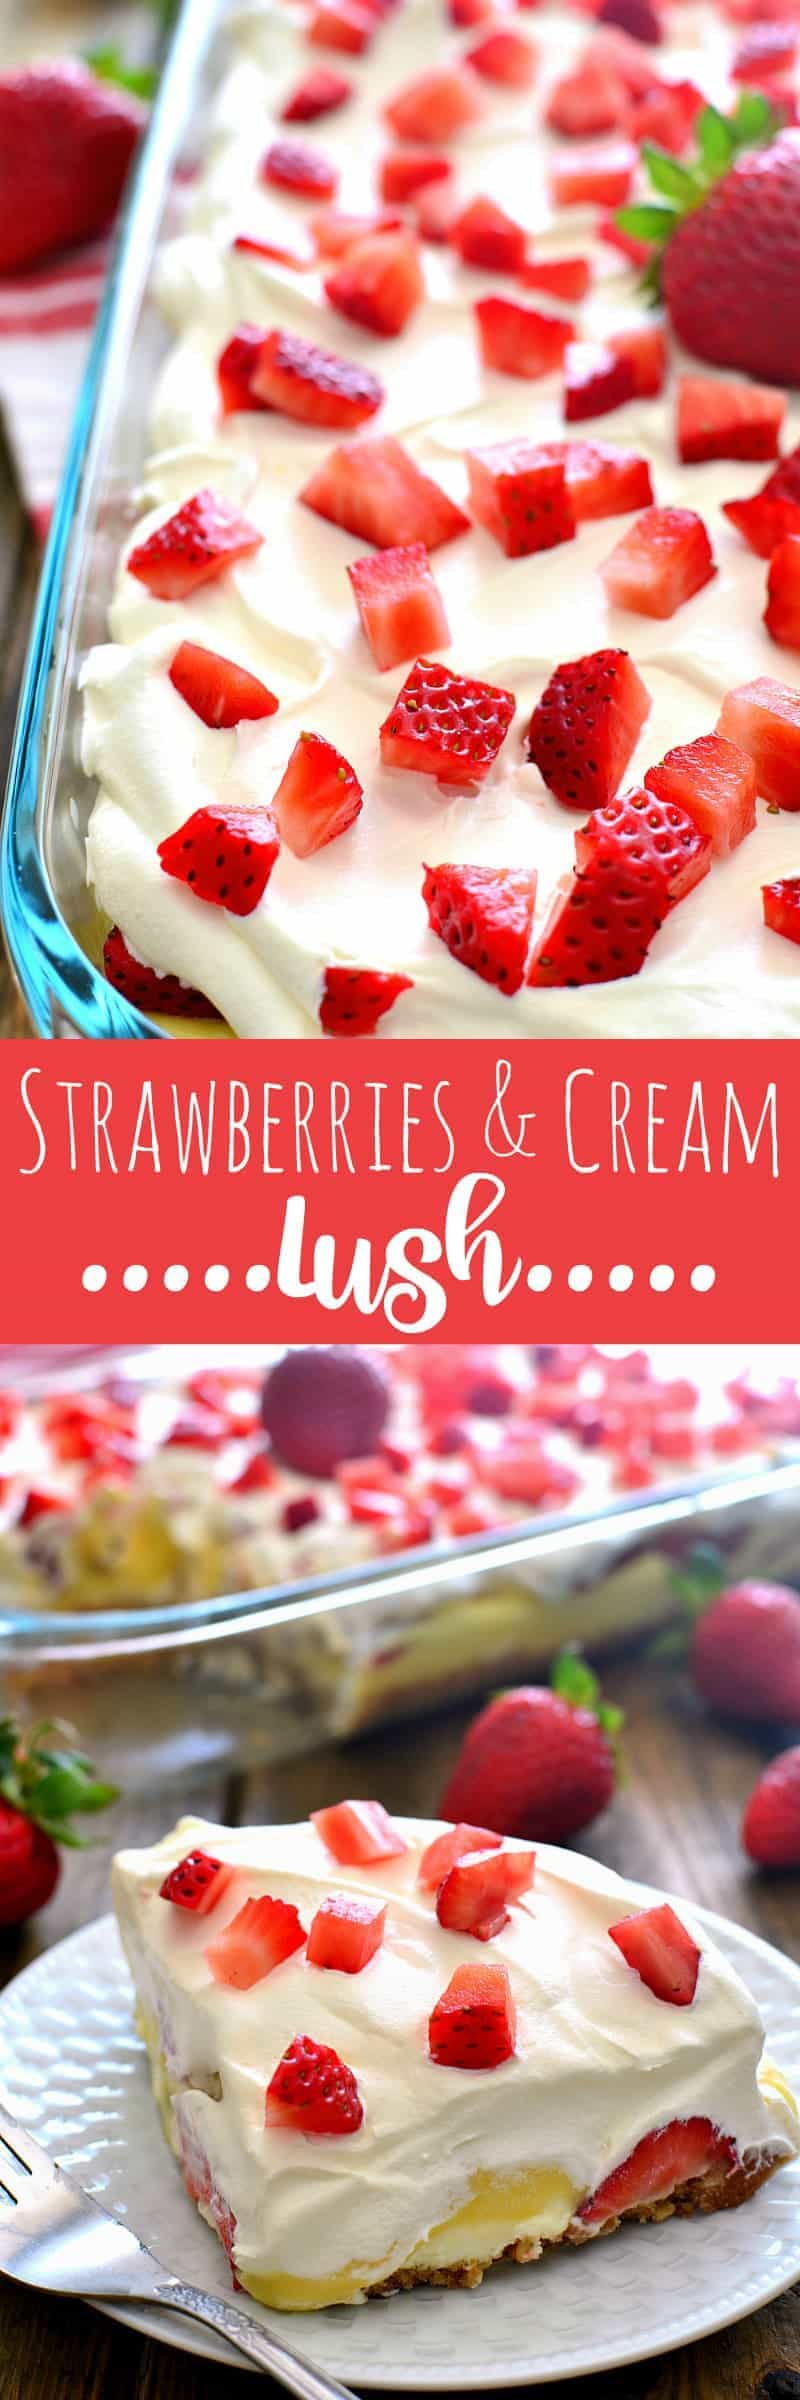 This Strawberries & Cream Lush Dessert combines a crunchy cookie crust with vanilla pudding, whipped topping, and fresh strawberries for a delicious summer treat that's guaranteed to become a favorite!